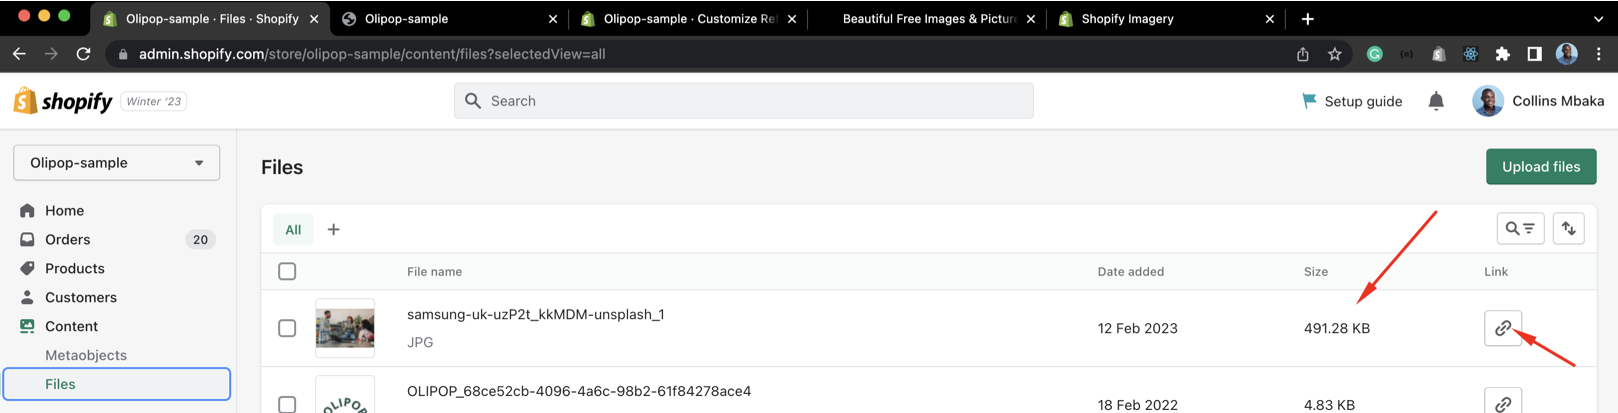 image showing the size of file uploaded to Shopify cdn